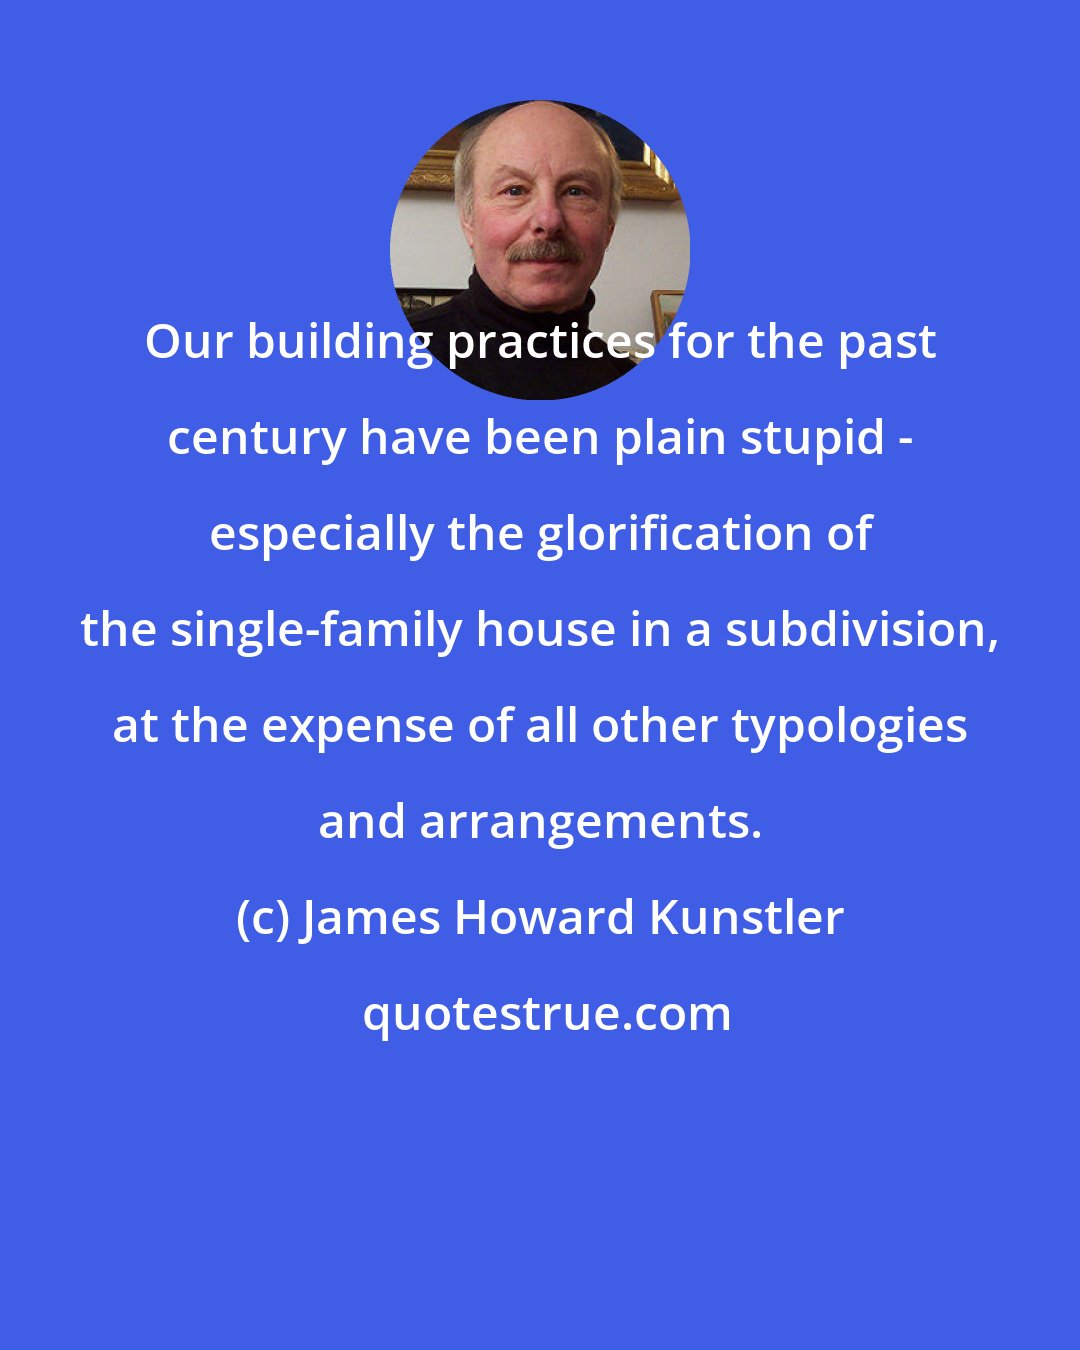 James Howard Kunstler: Our building practices for the past century have been plain stupid - especially the glorification of the single-family house in a subdivision, at the expense of all other typologies and arrangements.